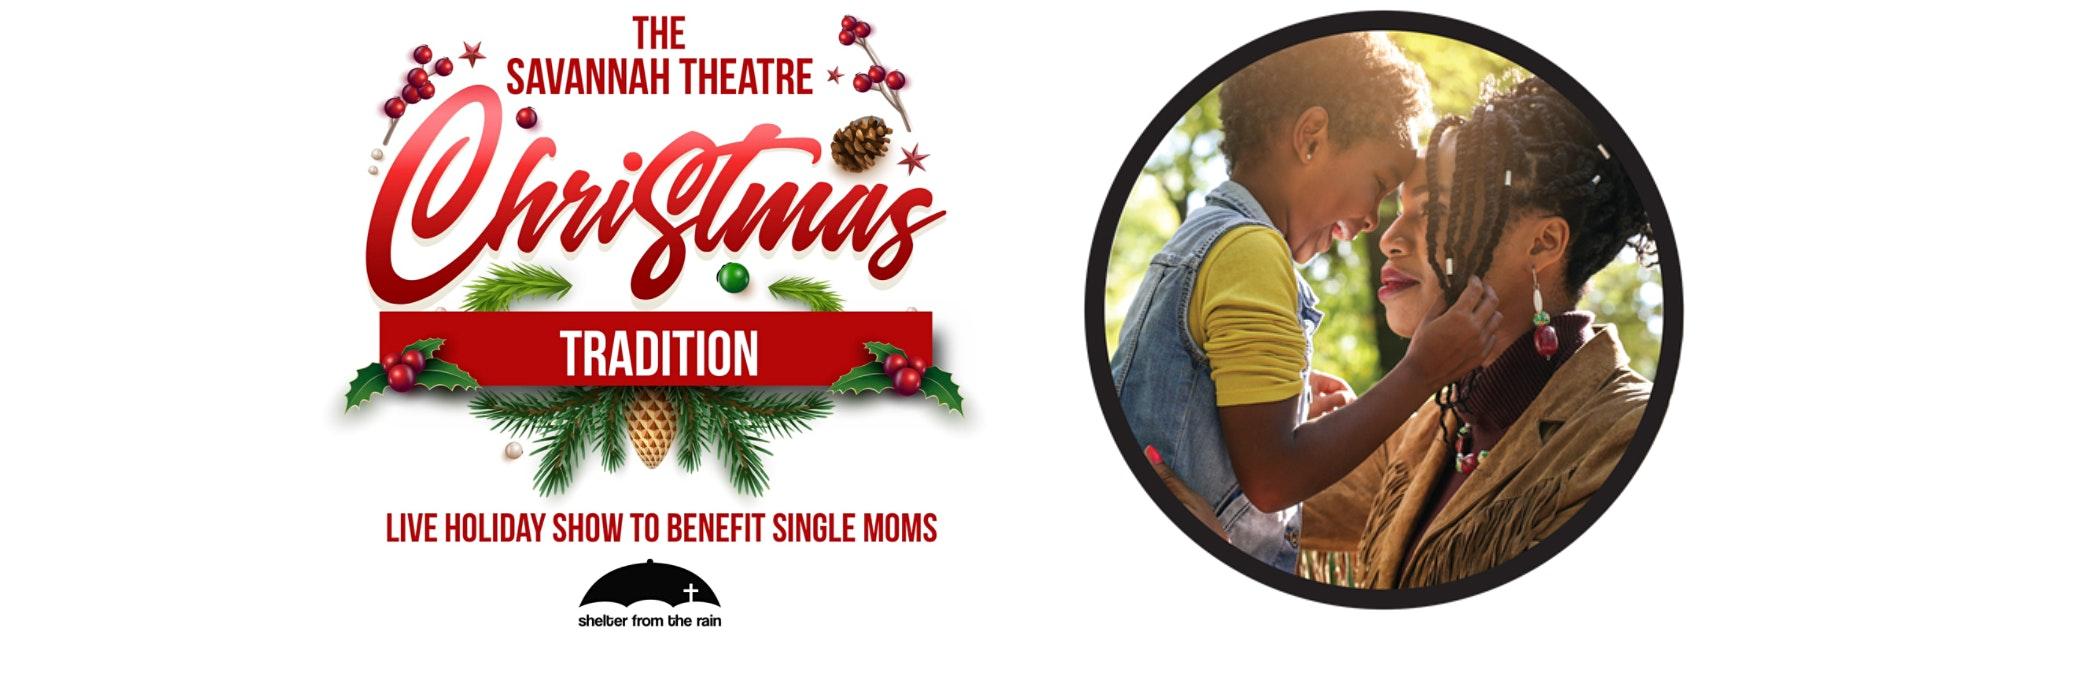 The Savannah Theatre Christmas Tradition 2021 To Benefit Single Moms